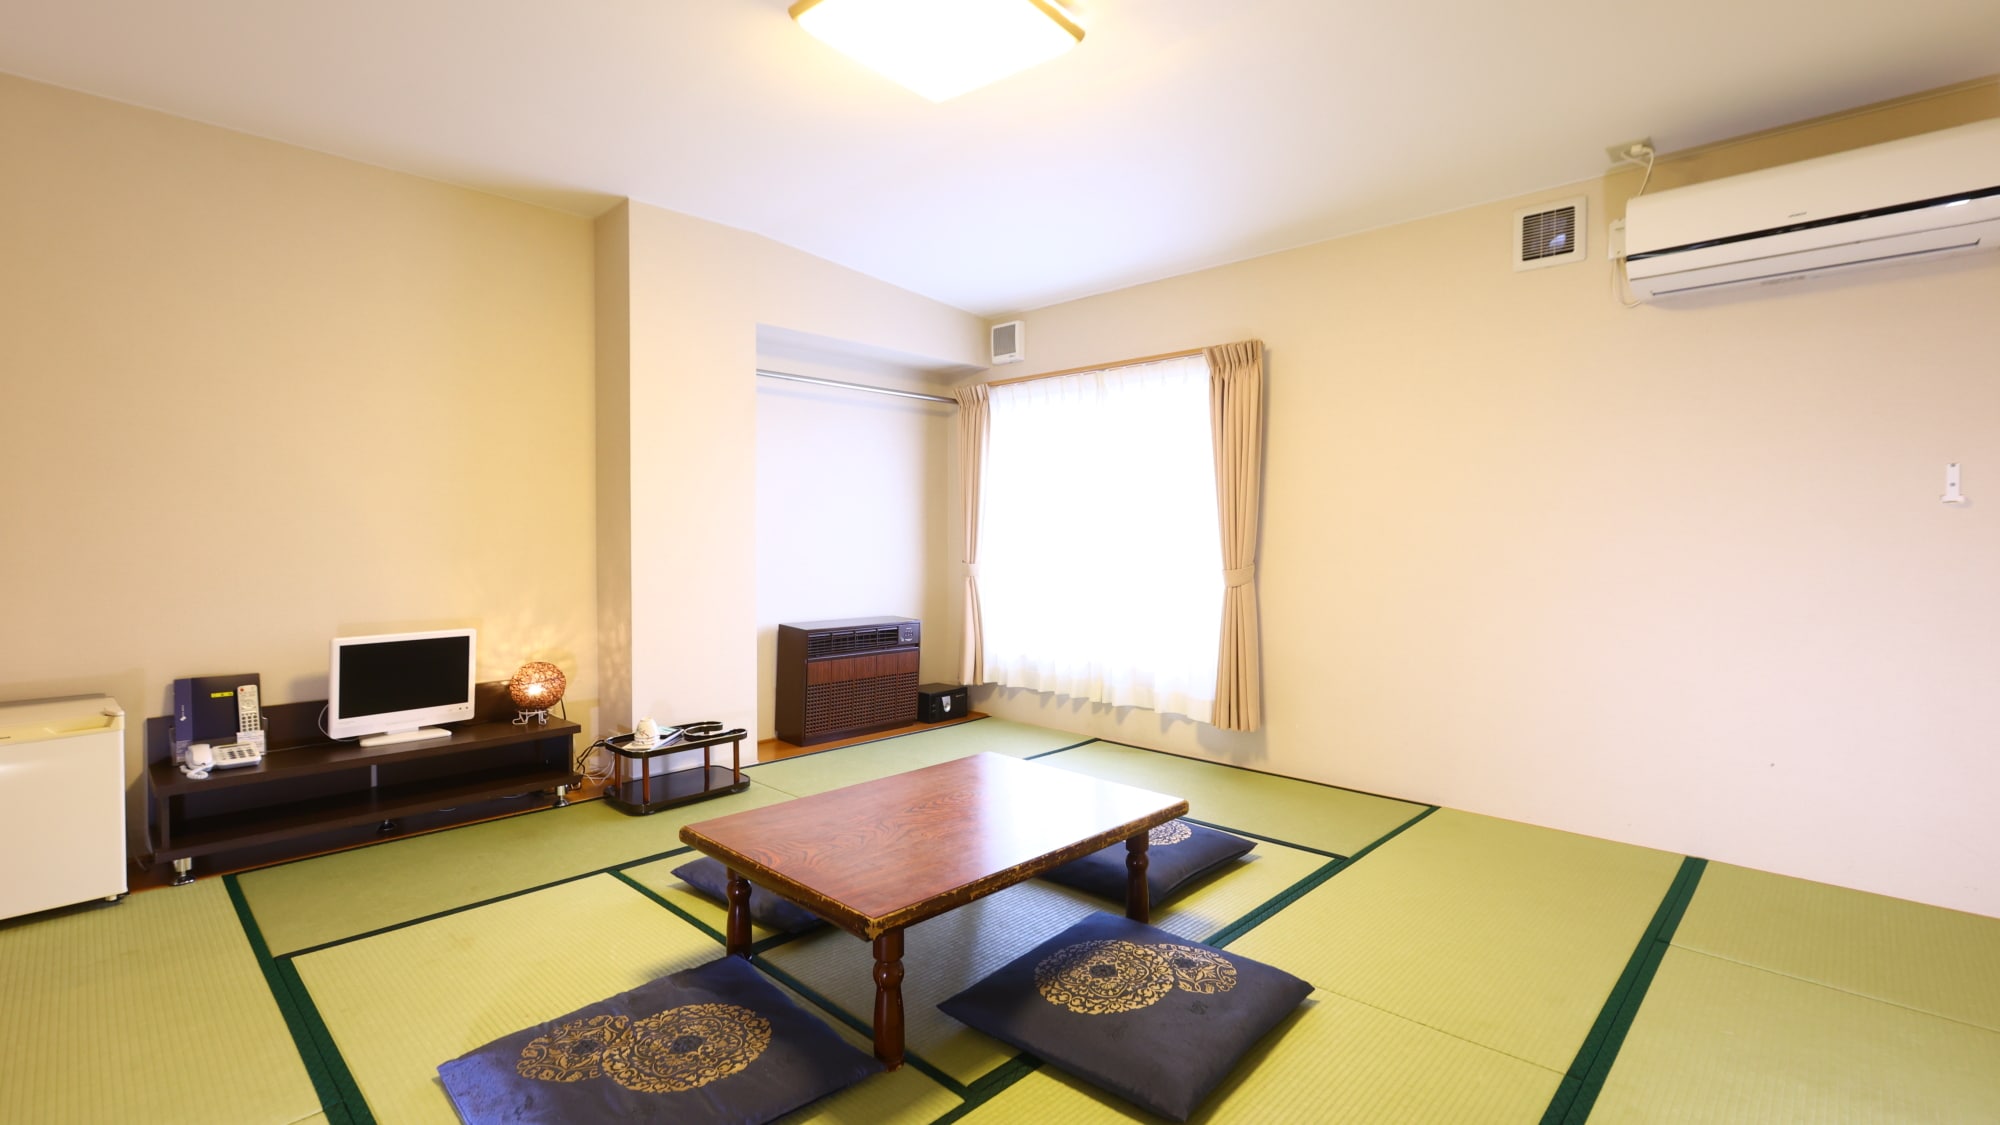 An example of a Japanese-style room. Recommended for groups and families.